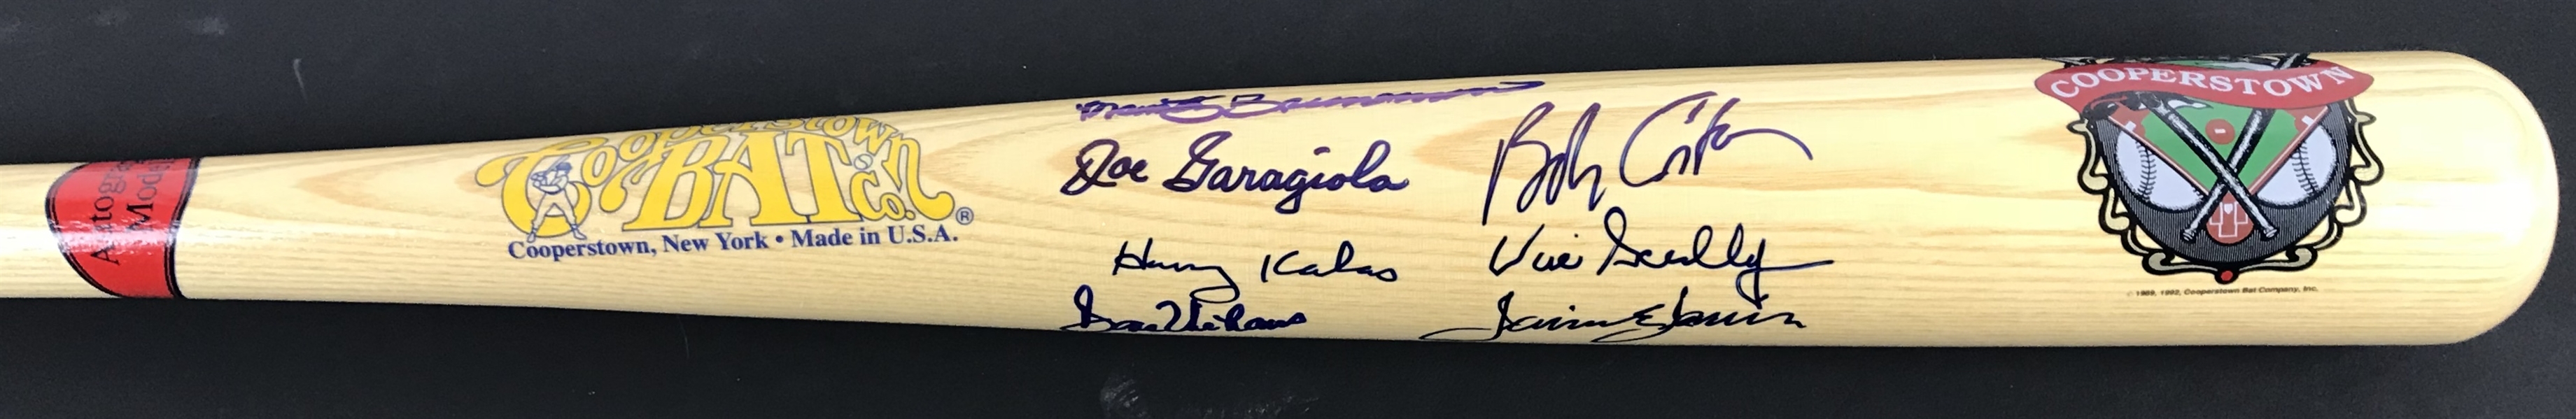 Legendary MLB Announcers Signed Cooperstown Bat w/Scully, Kalas, Costas, etc. (Beckett/BAS Guaranteed)